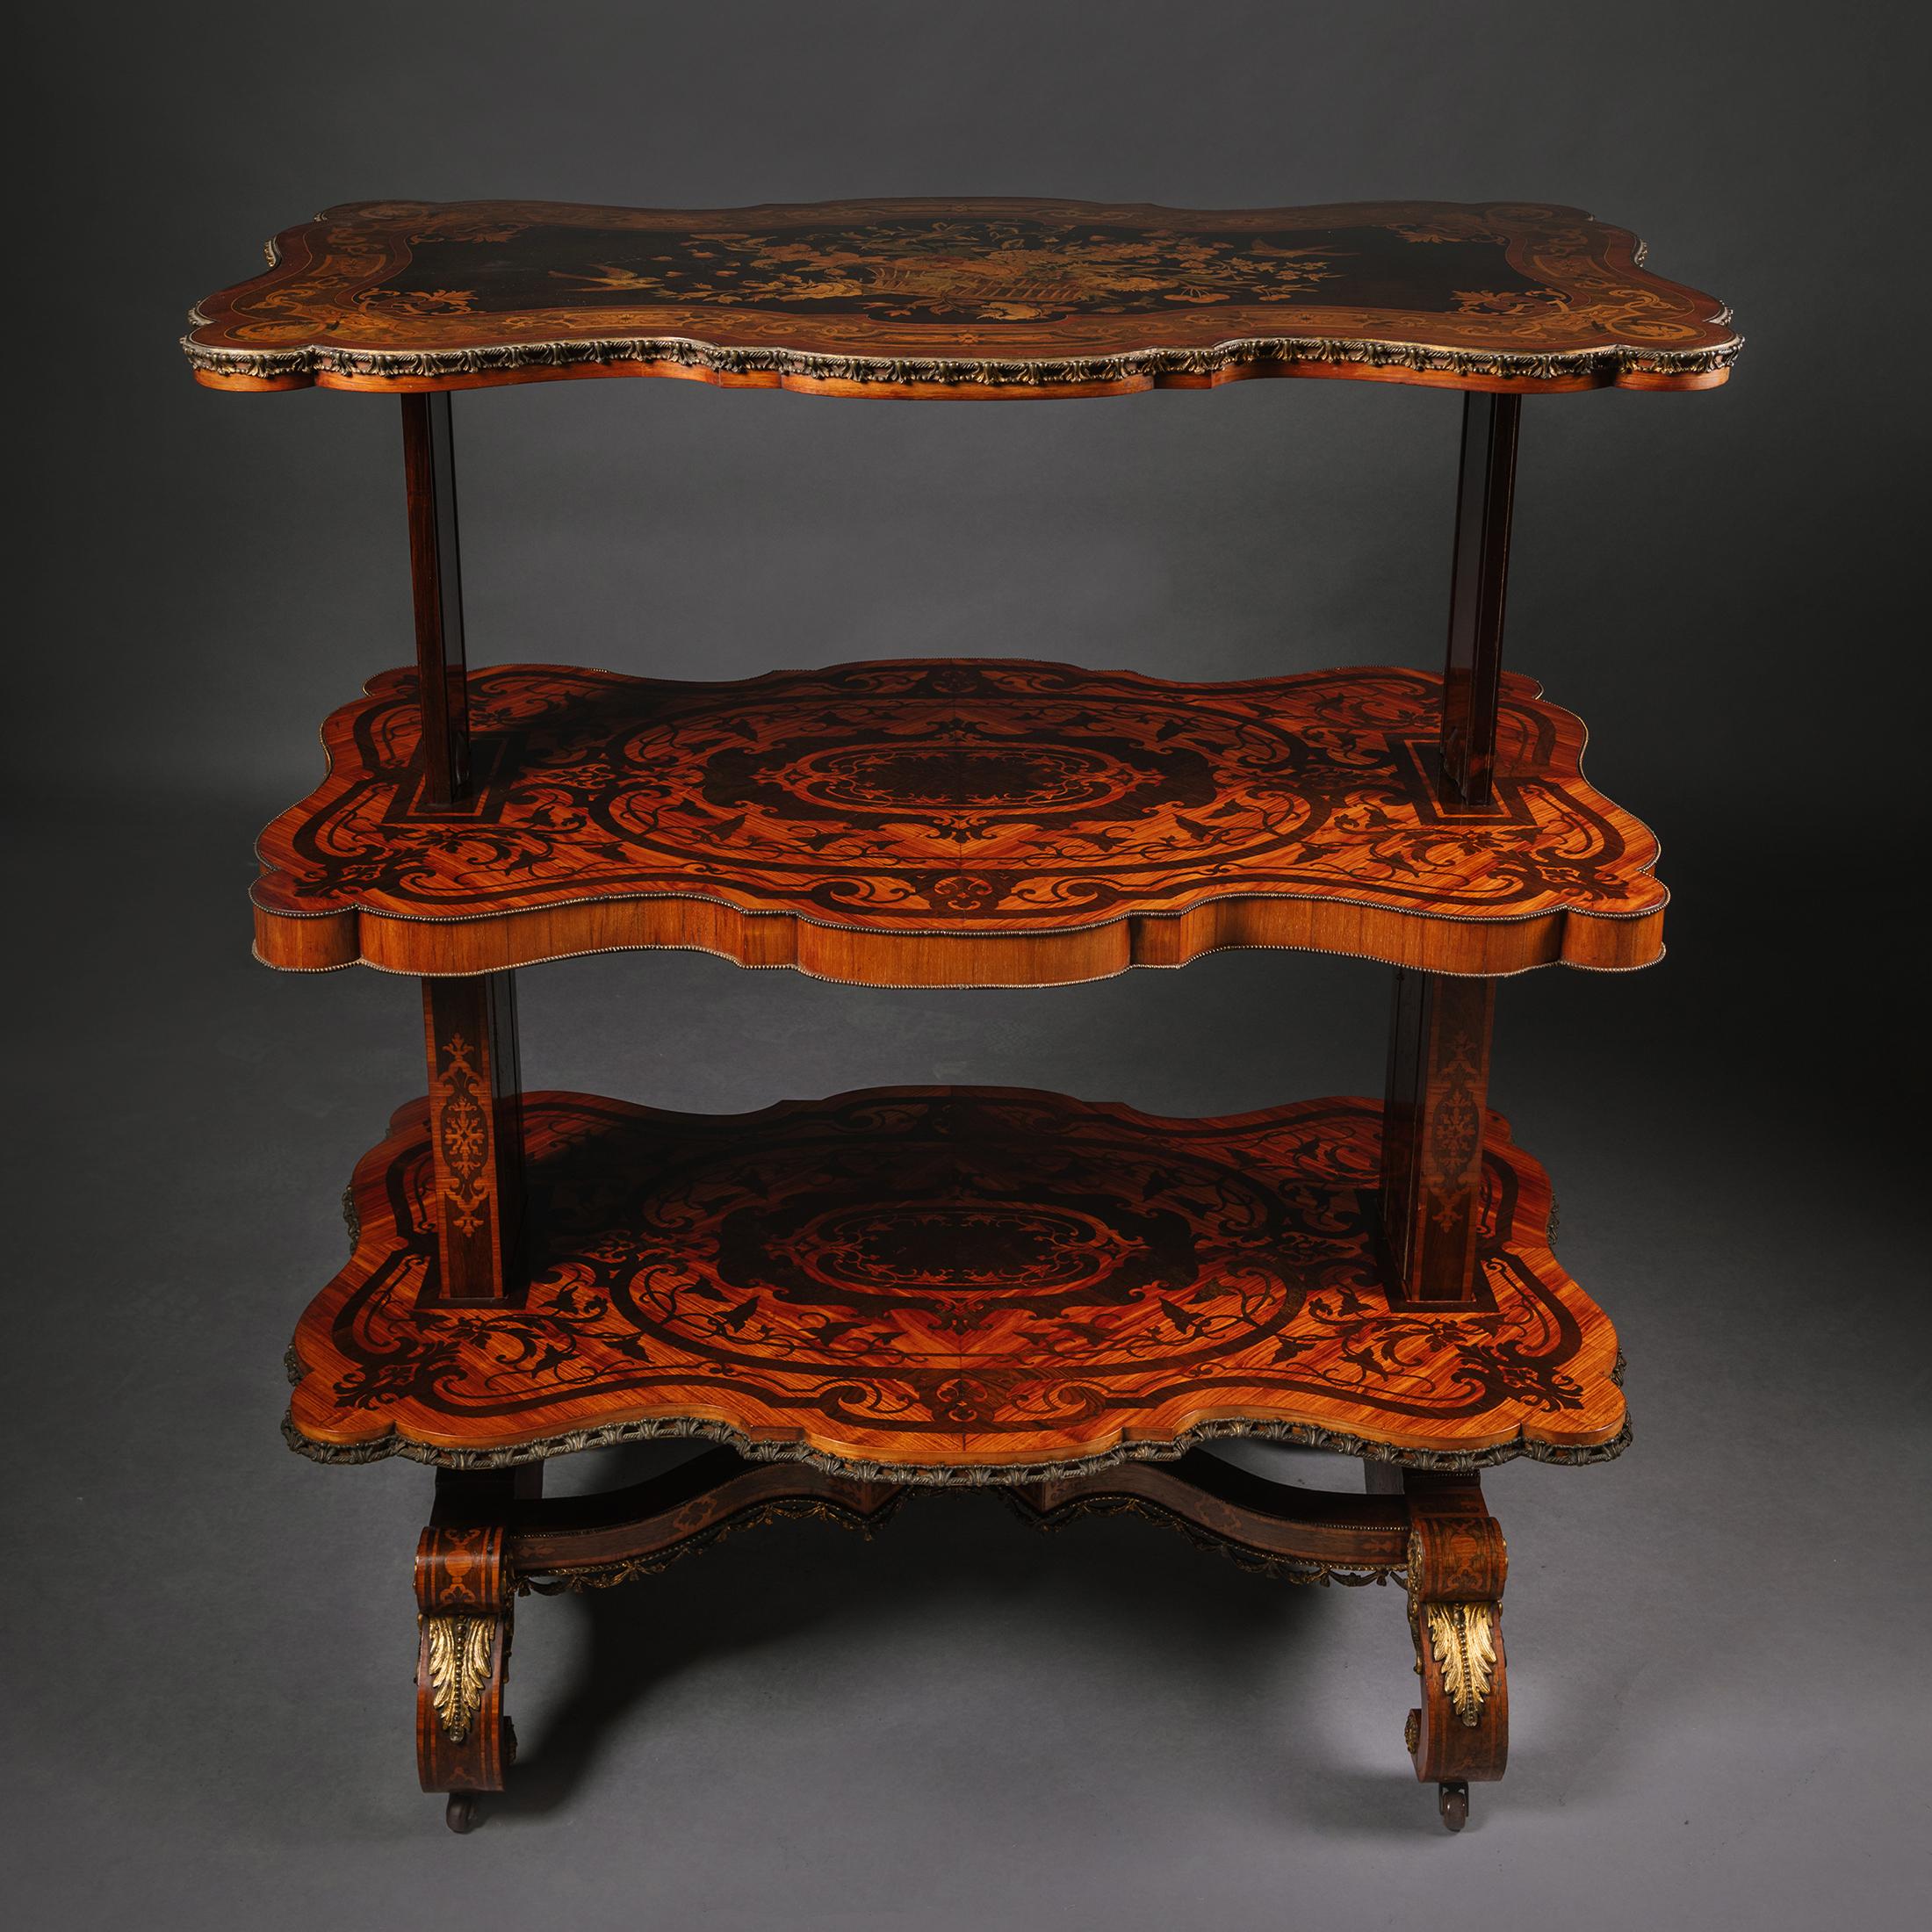 Rare and Unusual Victorian Gilt-Bronze and Marquetry Metamorphic Table For Sale 1